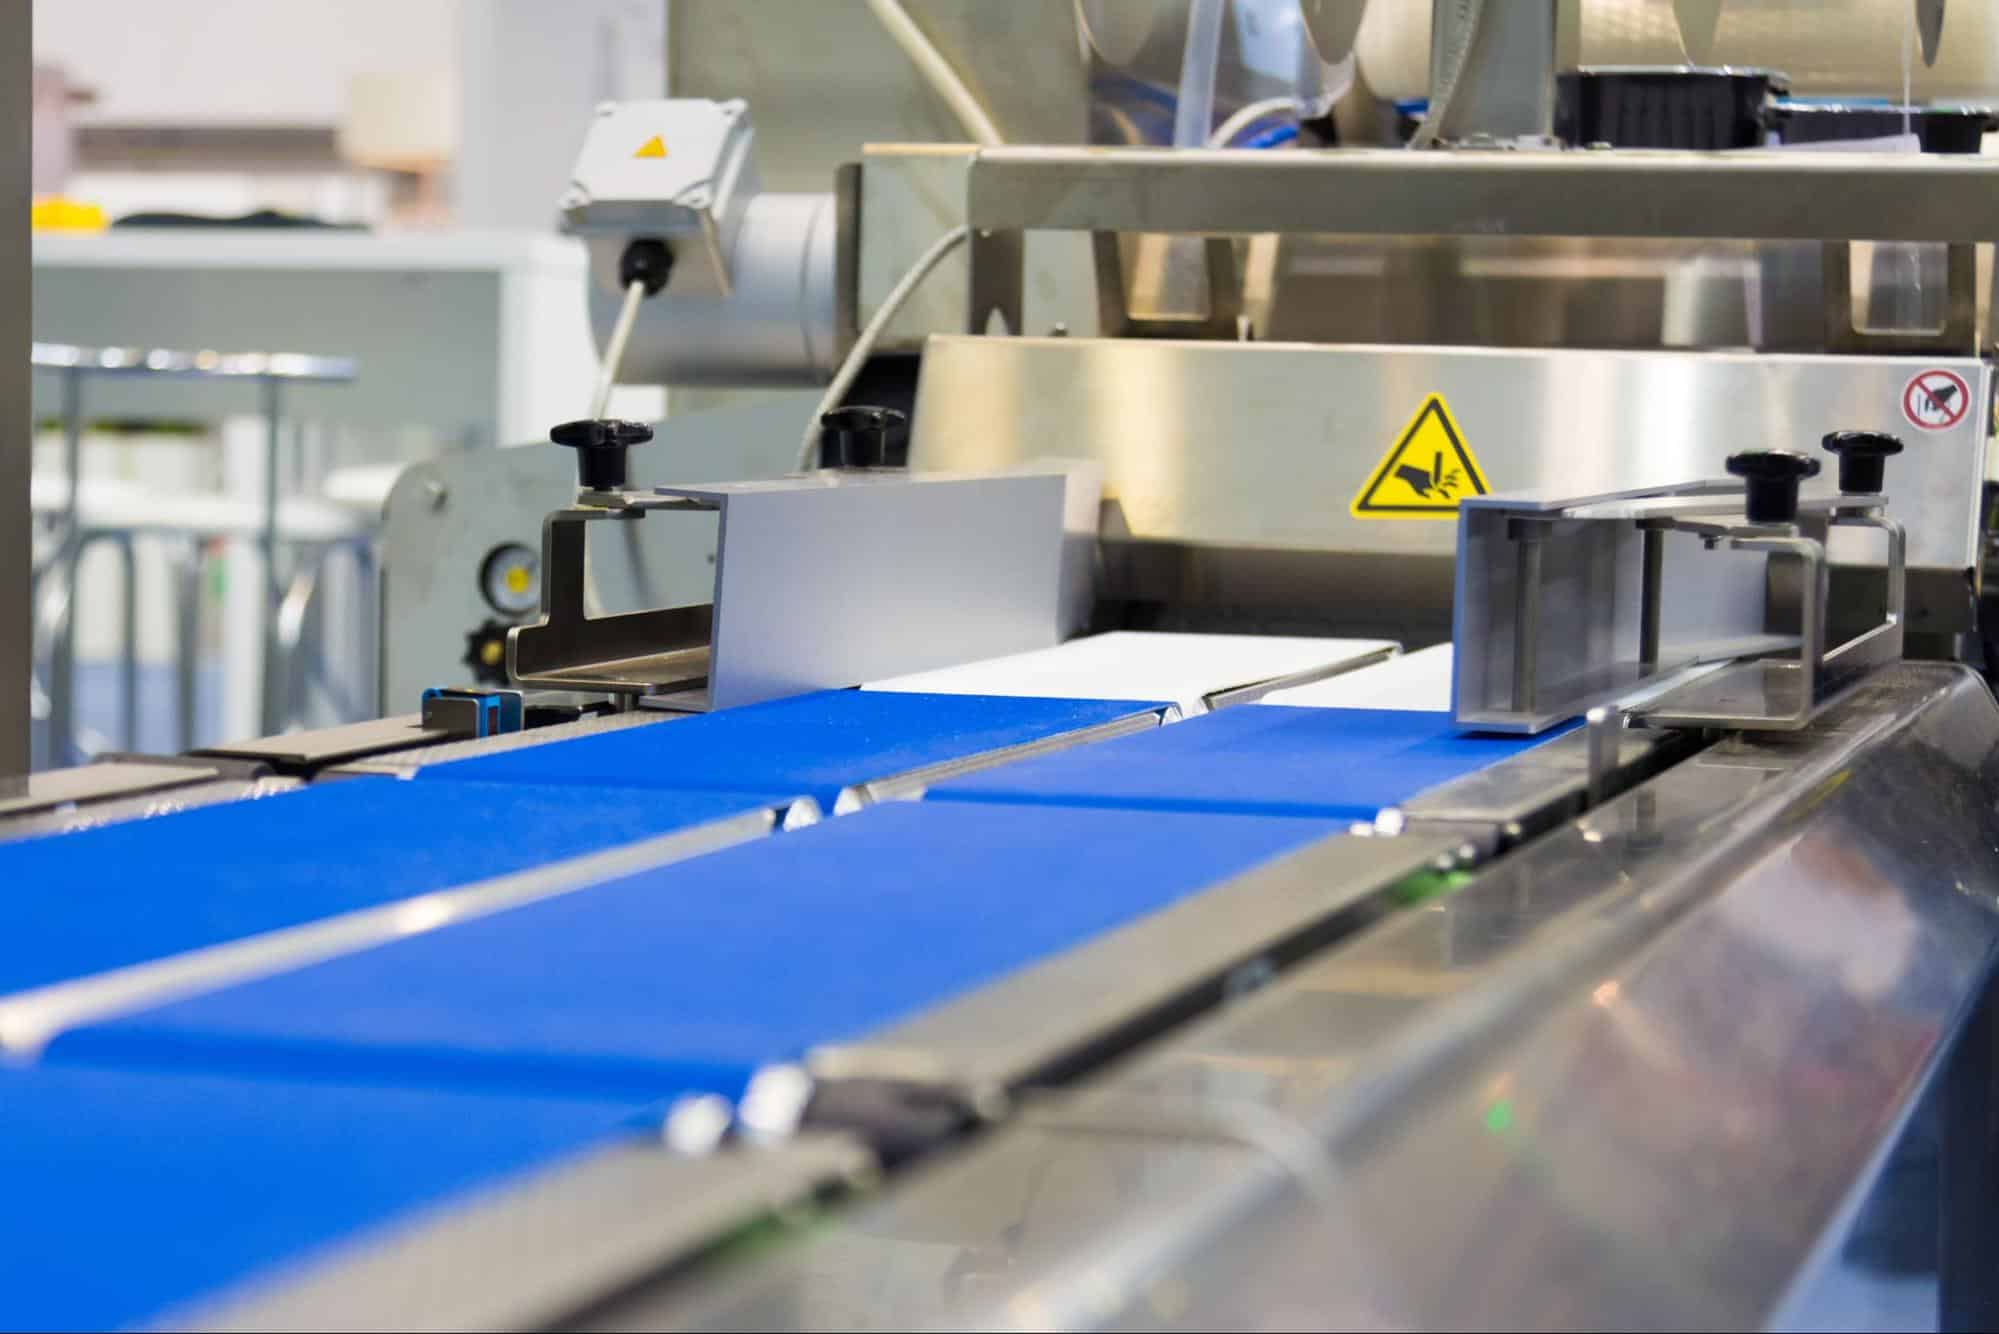 A blue modular conveyor belt is designed for safety and sanitary conveying. A lift gate can be added to a conveyor belt for safe, easy navigation without the need for catwalks or crossovers.